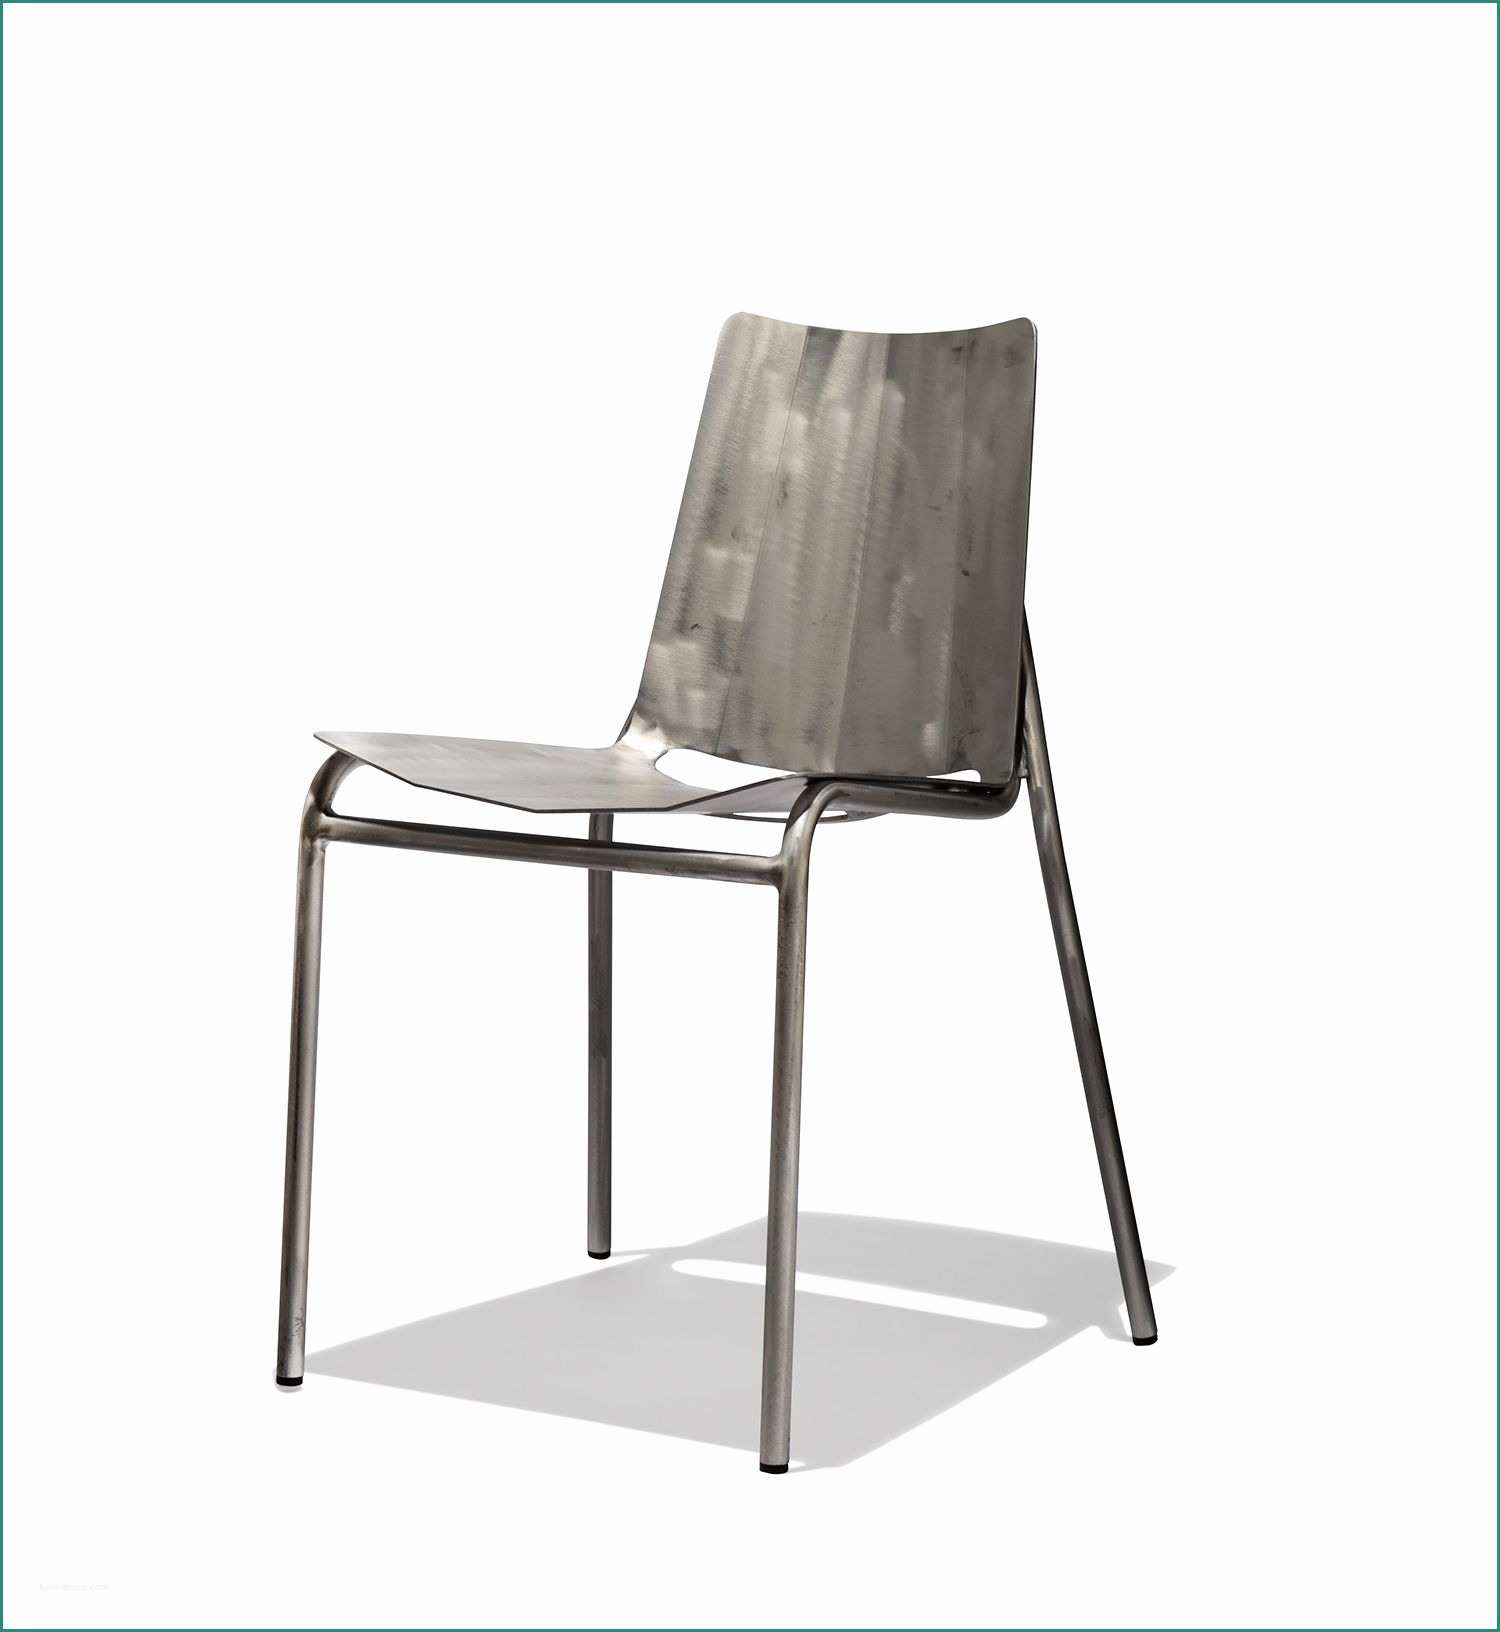 Poltrone Da Esterno E Slant Side Chair From Industry West Chairs